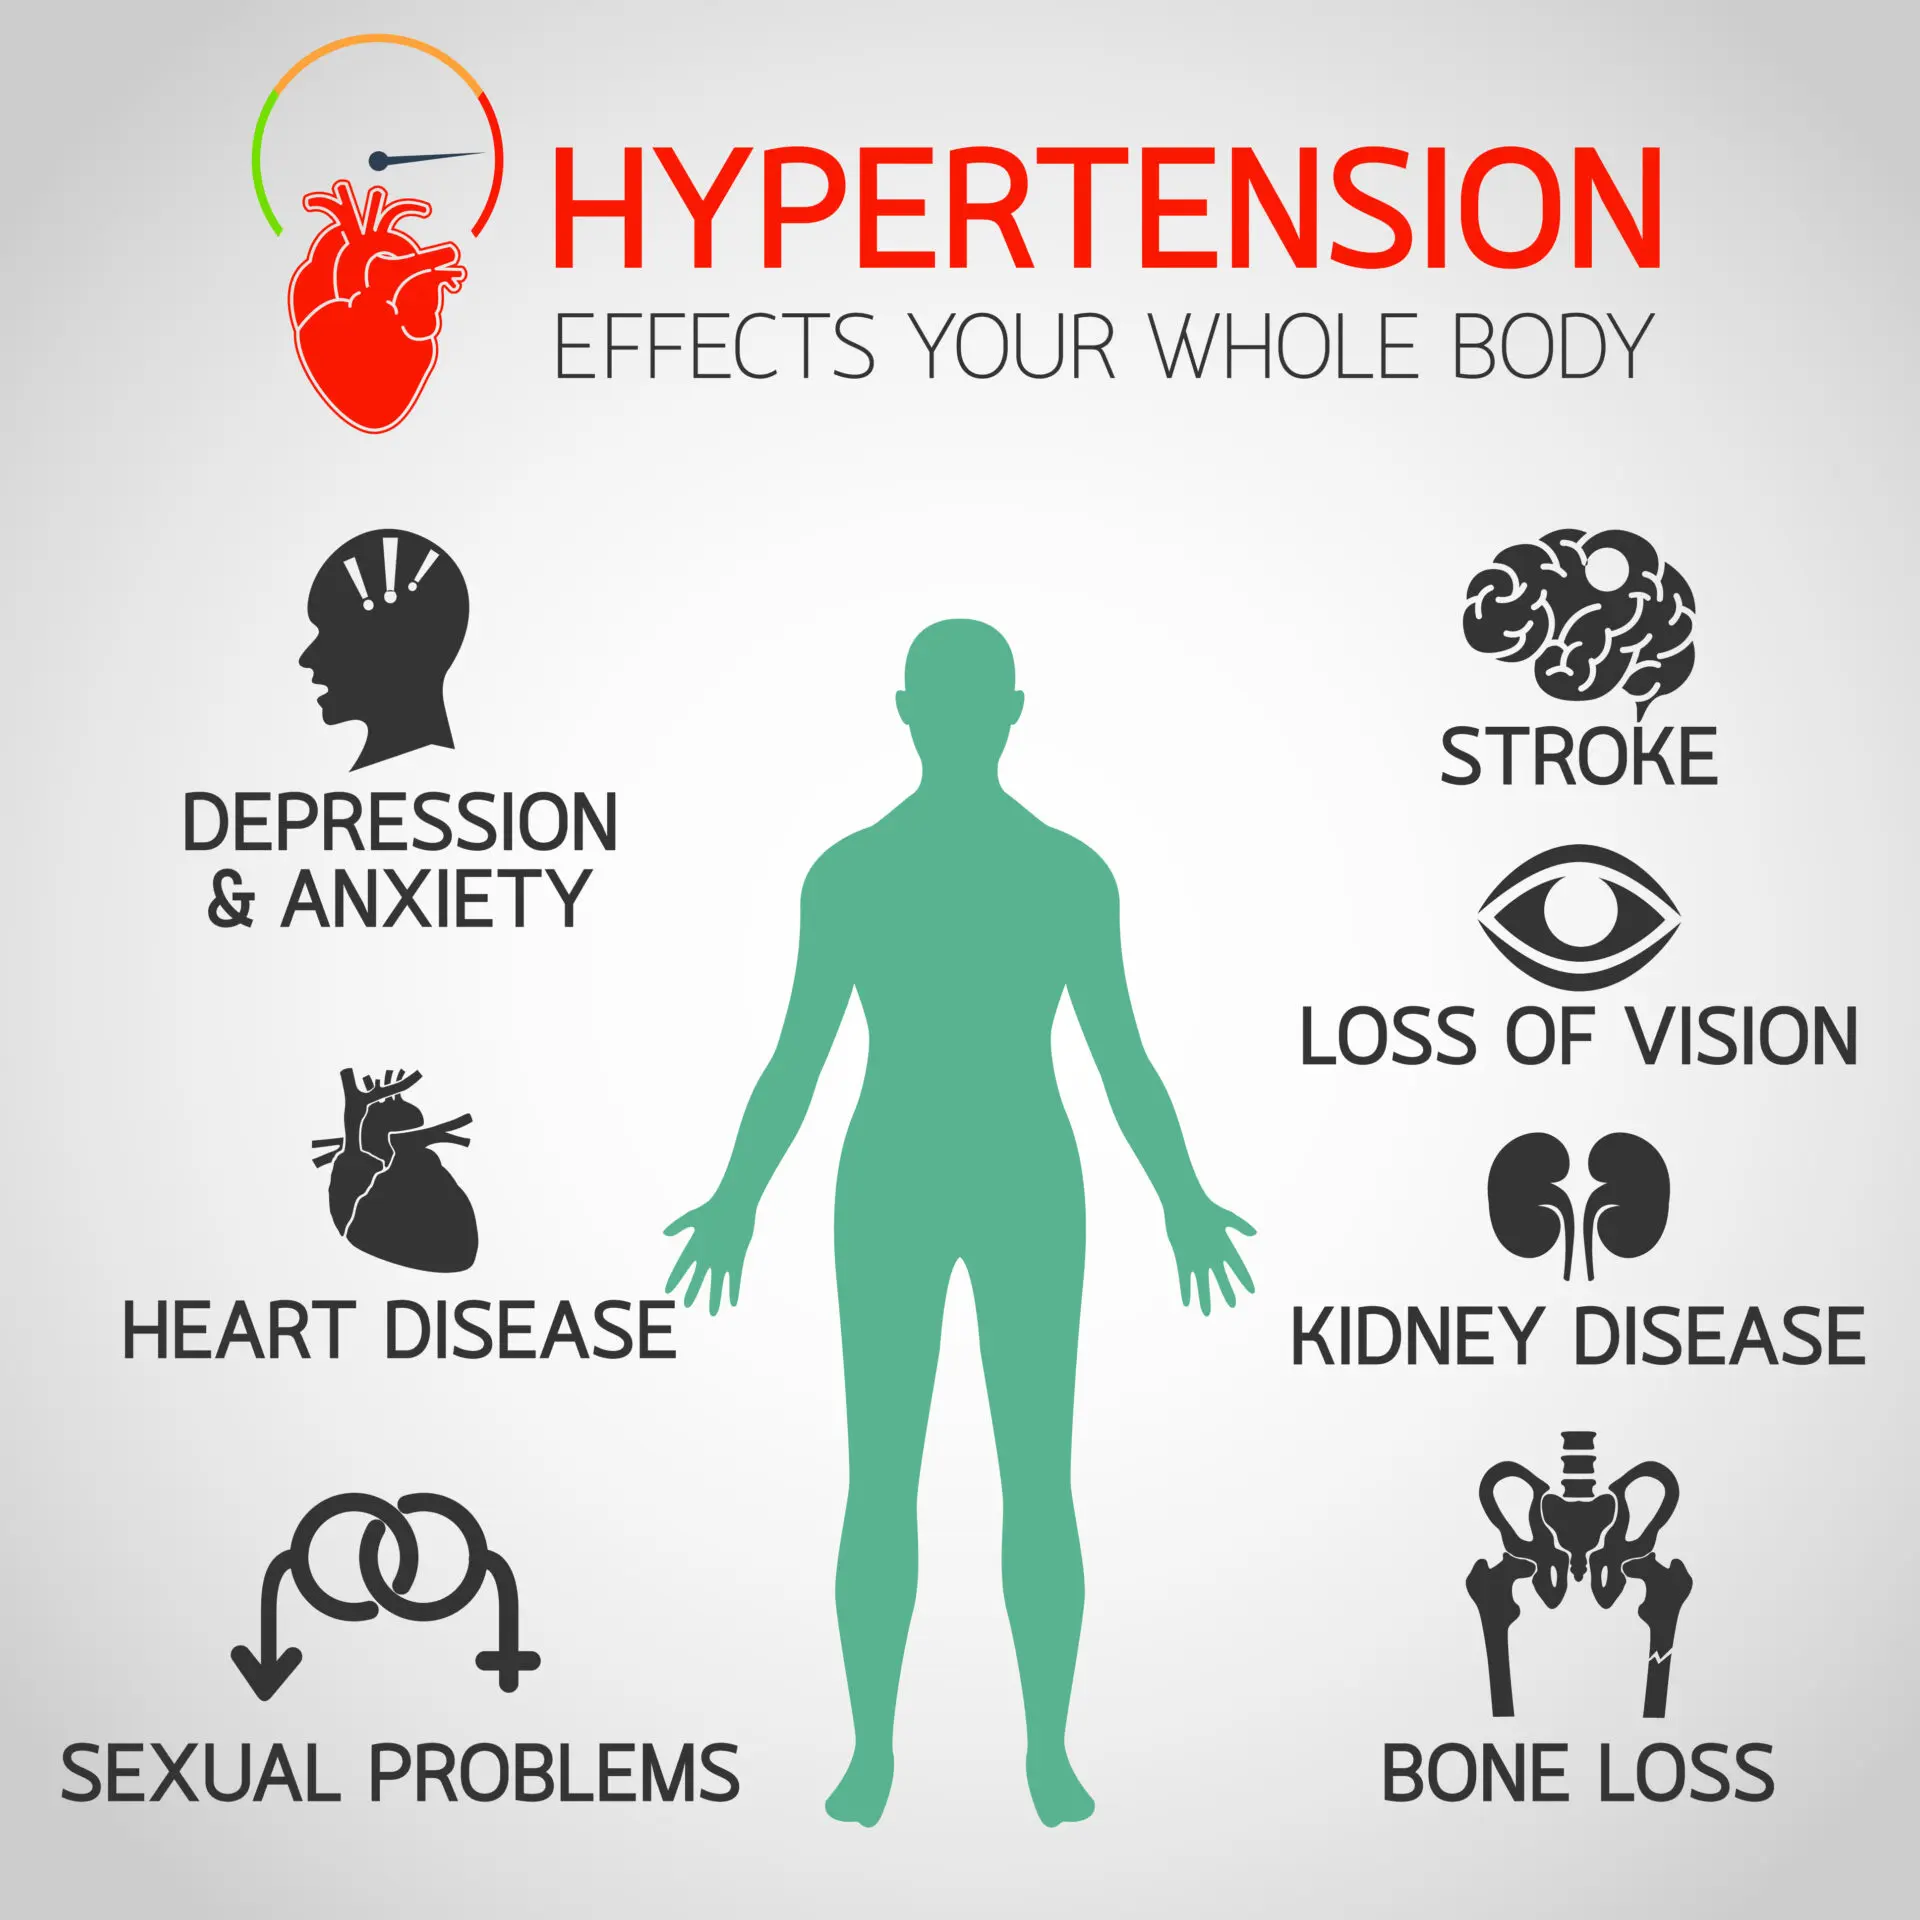 Effects of hypertension on the body